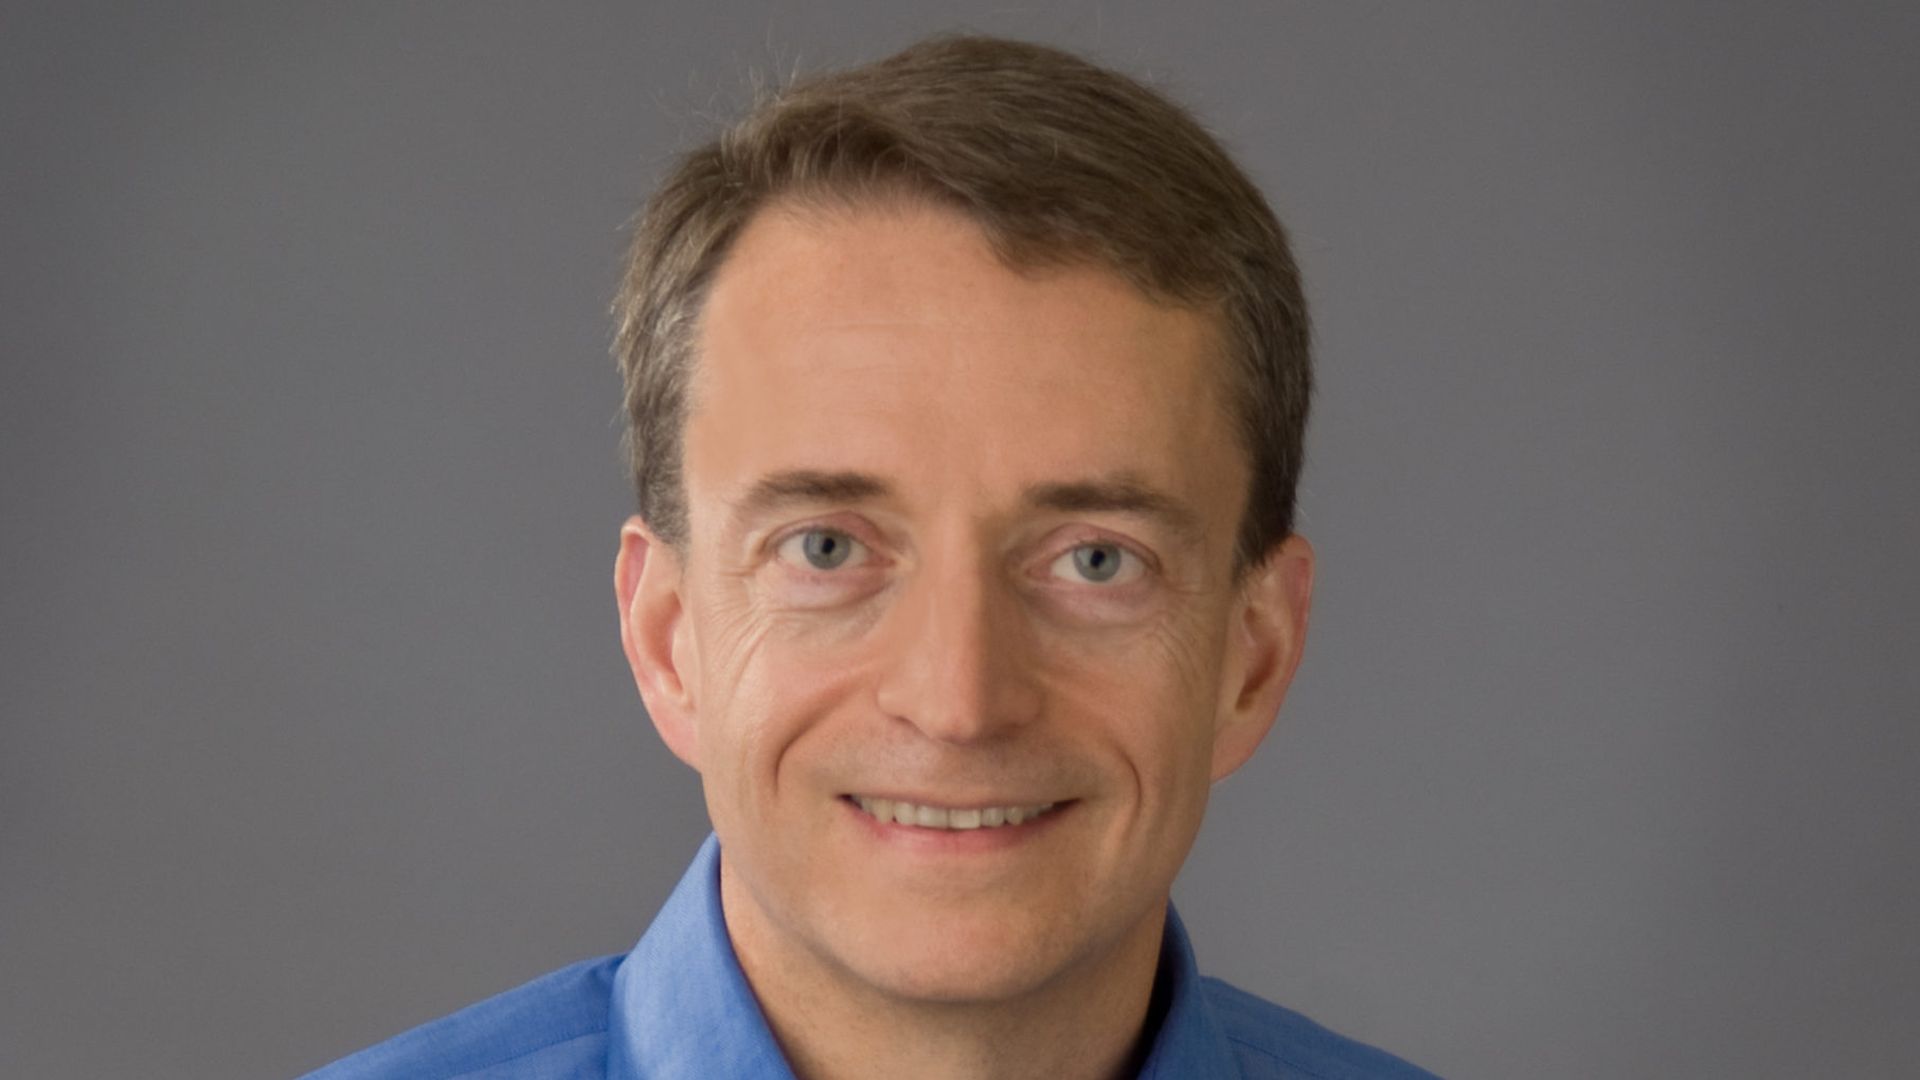 A headshot of newly named Intel CEO Pat Gelsinger